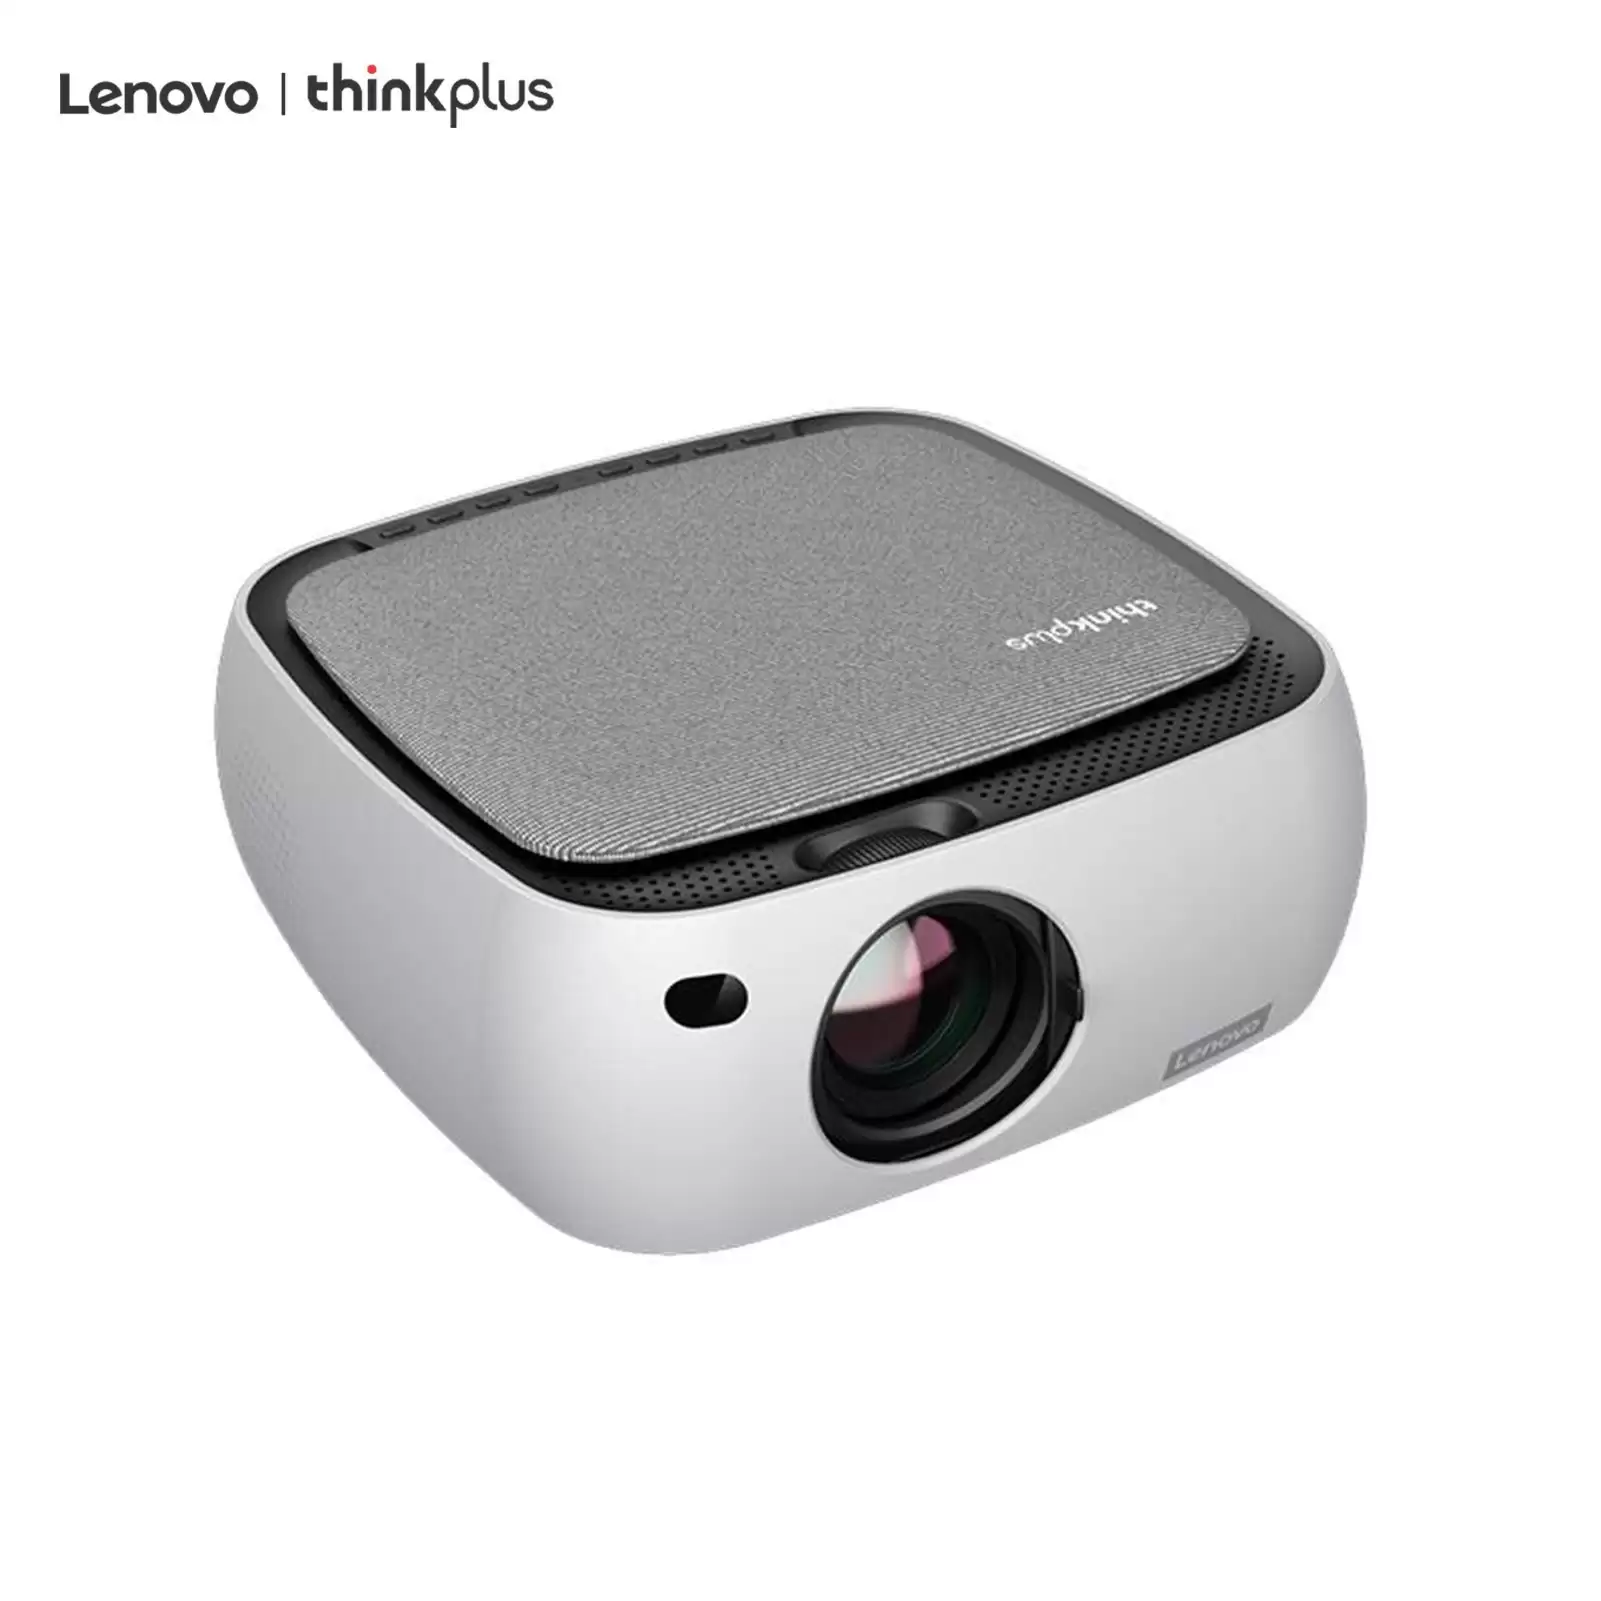 Pay Only $ 167.39 For Lenovo Thinkplus Air H4s Projector With This Discount Coupon At Cafago